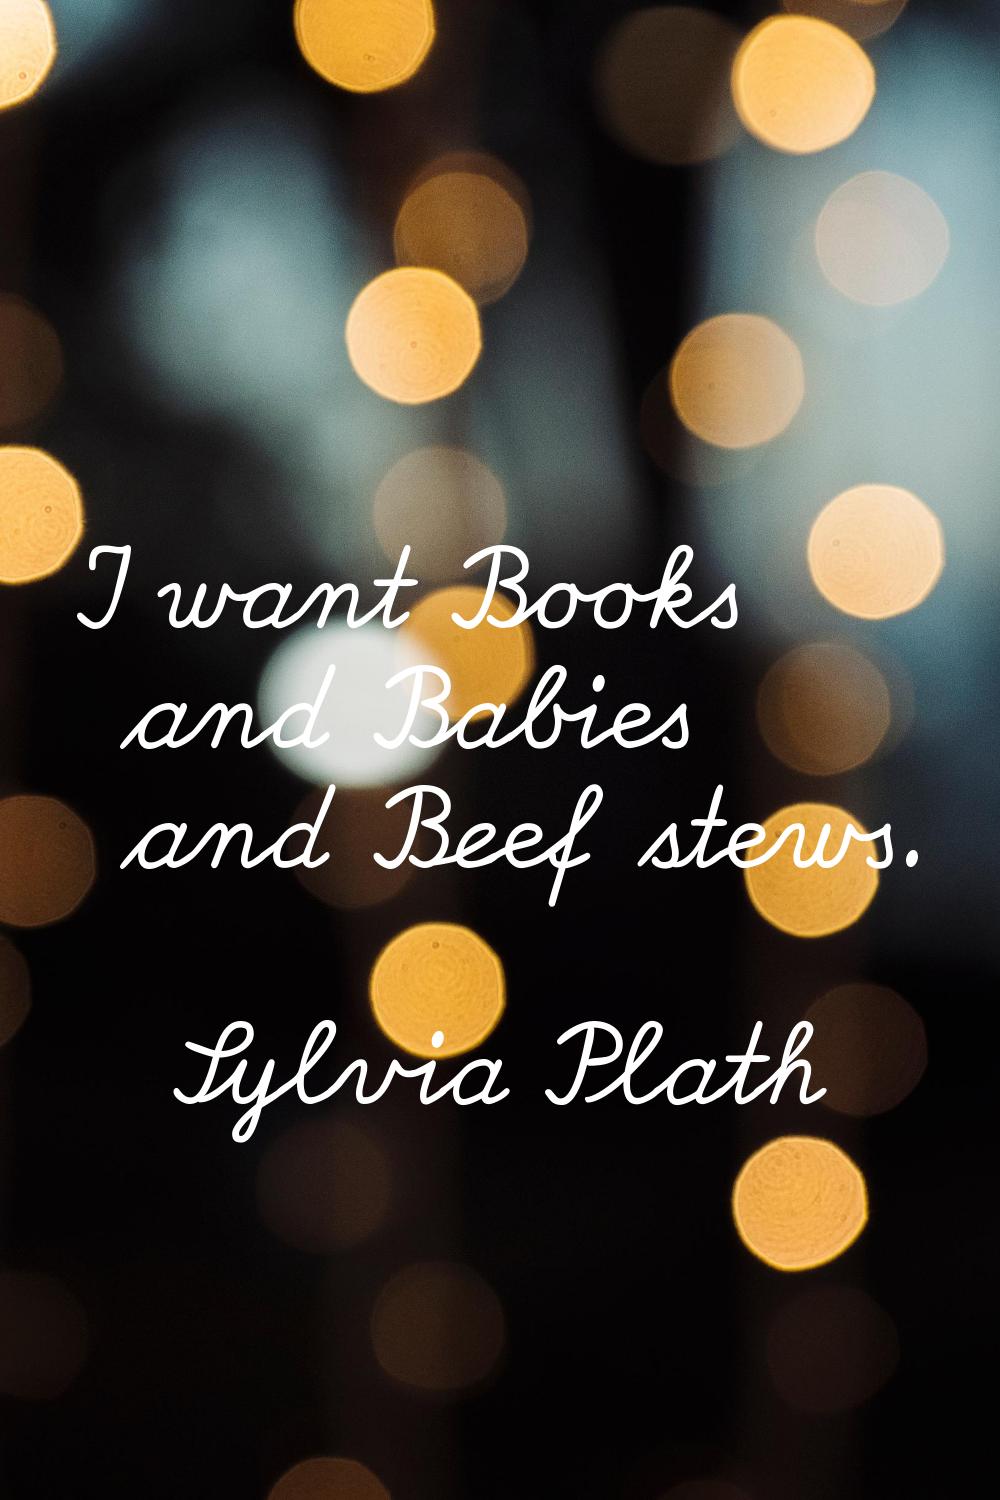 I want Books and Babies and Beef stews.